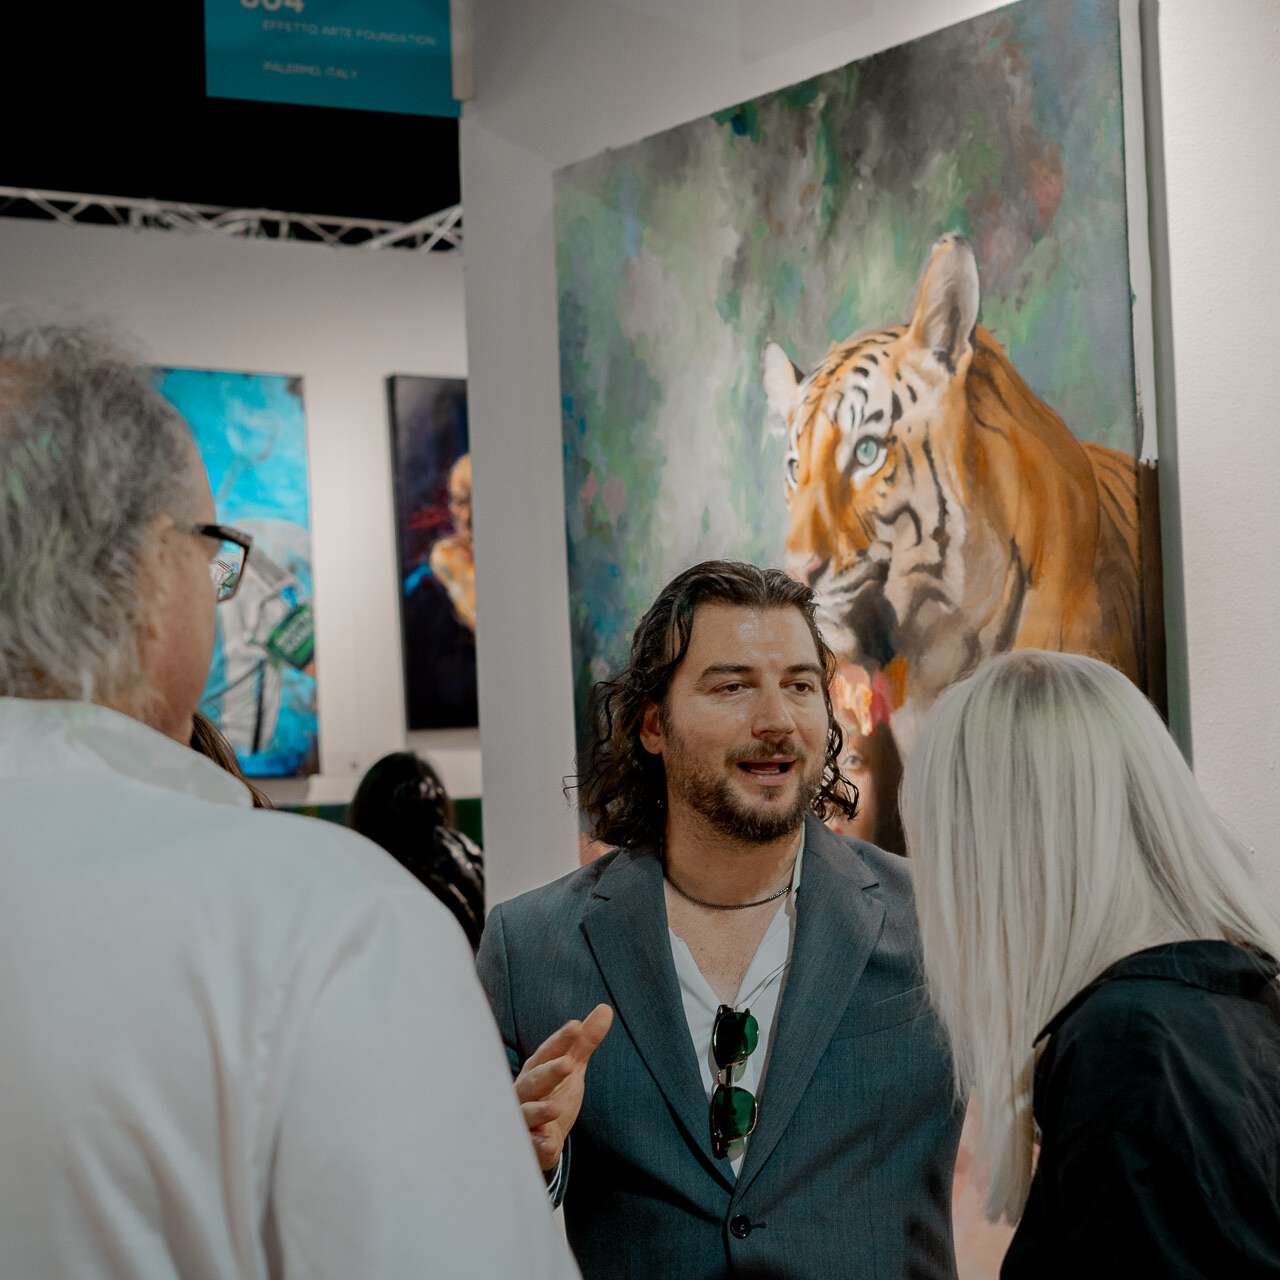 Alex Righetto is deeply engaged in conversation with visitors at Miami Art Week, with his expressive painting 'The Guardian' in the background.